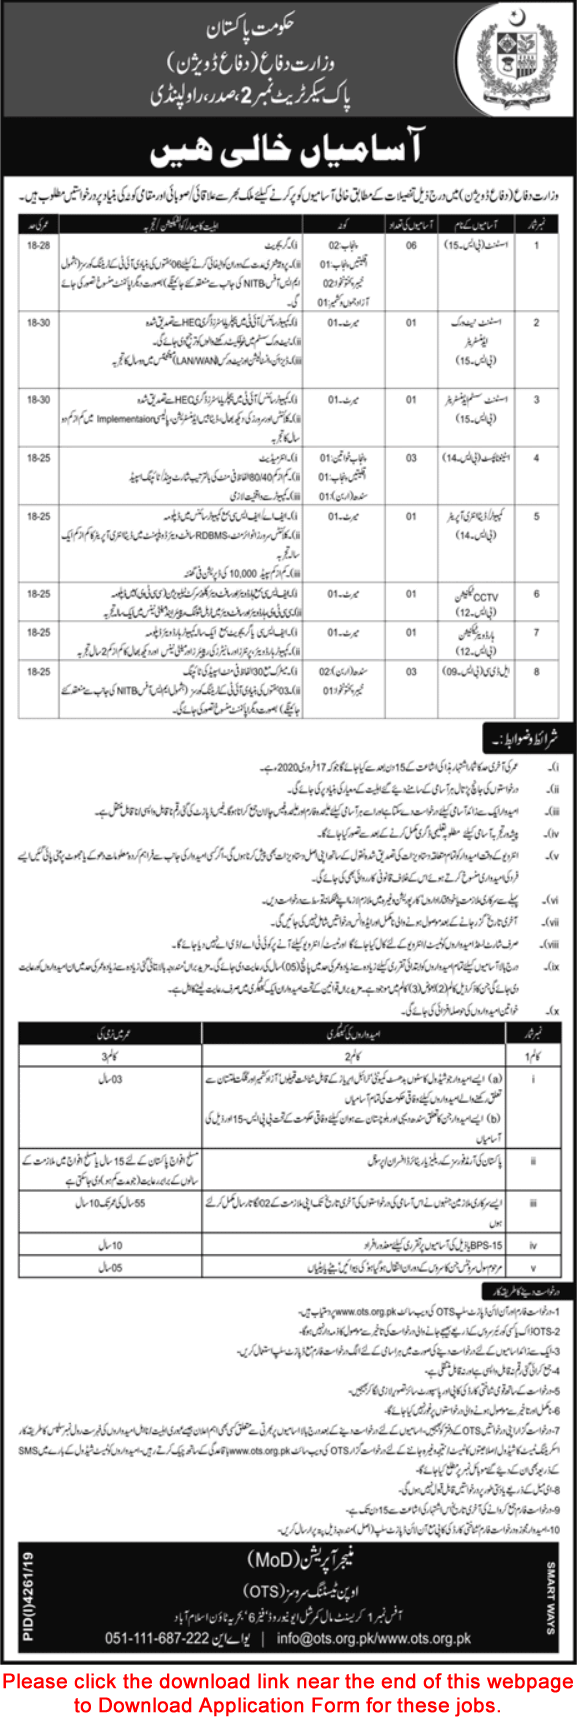 Ministry of Defence Rawalpindi Jobs 2020 February OTS Application Form Assistants, Stenotypists & Others Latest